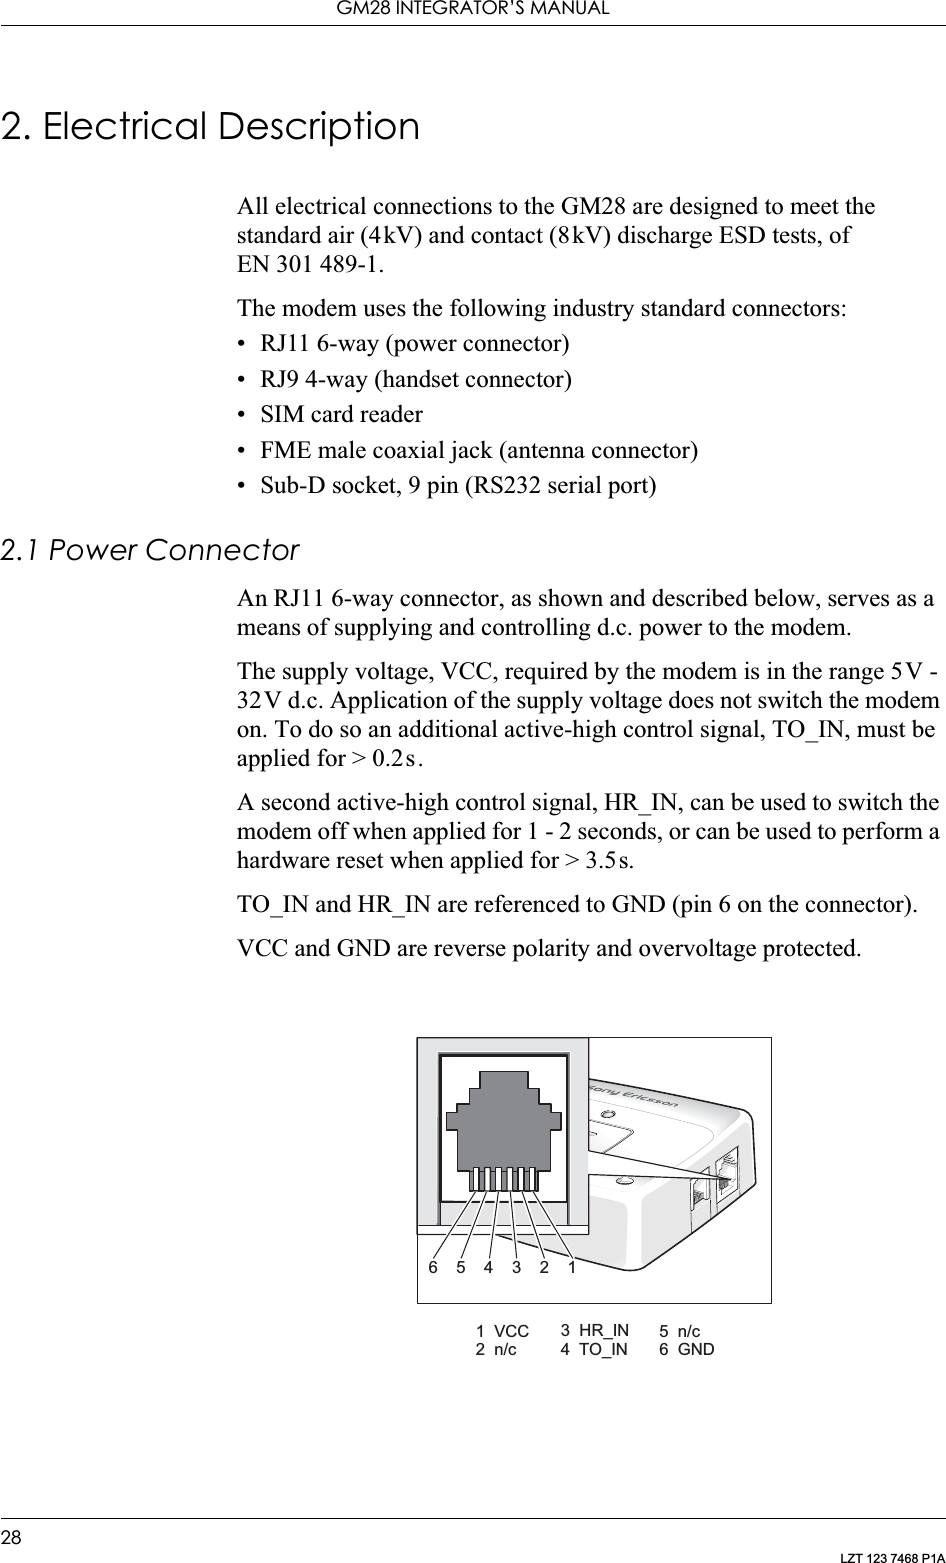 GM28 INTEGRATOR’S MANUAL28LZT 123 7468 P1A2. Electrical DescriptionAll electrical connections to the GM28 are designed to meet the standard air (4kV) and contact (8kV) discharge ESD tests, of EN 301 489-1.The modem uses the following industry standard connectors:• RJ11 6-way (power connector)• RJ9 4-way (handset connector)• SIM card reader• FME male coaxial jack (antenna connector)• Sub-D socket, 9 pin (RS232 serial port)2.1 Power ConnectorAn RJ11 6-way connector, as shown and described below, serves as a means of supplying and controlling d.c. power to the modem.The supply voltage, VCC, required by the modem is in the range 5V - 32V d.c. Application of the supply voltage does not switch the modem on. To do so an additional active-high control signal, TO_IN, must be applied for &gt; 0.2s.A second active-high control signal, HR_IN, can be used to switch the modem off when applied for 1 - 2 seconds, or can be used to perform a hardware reset when applied for &gt; 3.5s.TO_IN and HR_IN are referenced to GND (pin 6 on the connector).VCC and GND are reverse polarity and overvoltage protected.6543211 VCC2 n/c3 HR_IN4 TO_IN5 n/c6 GND